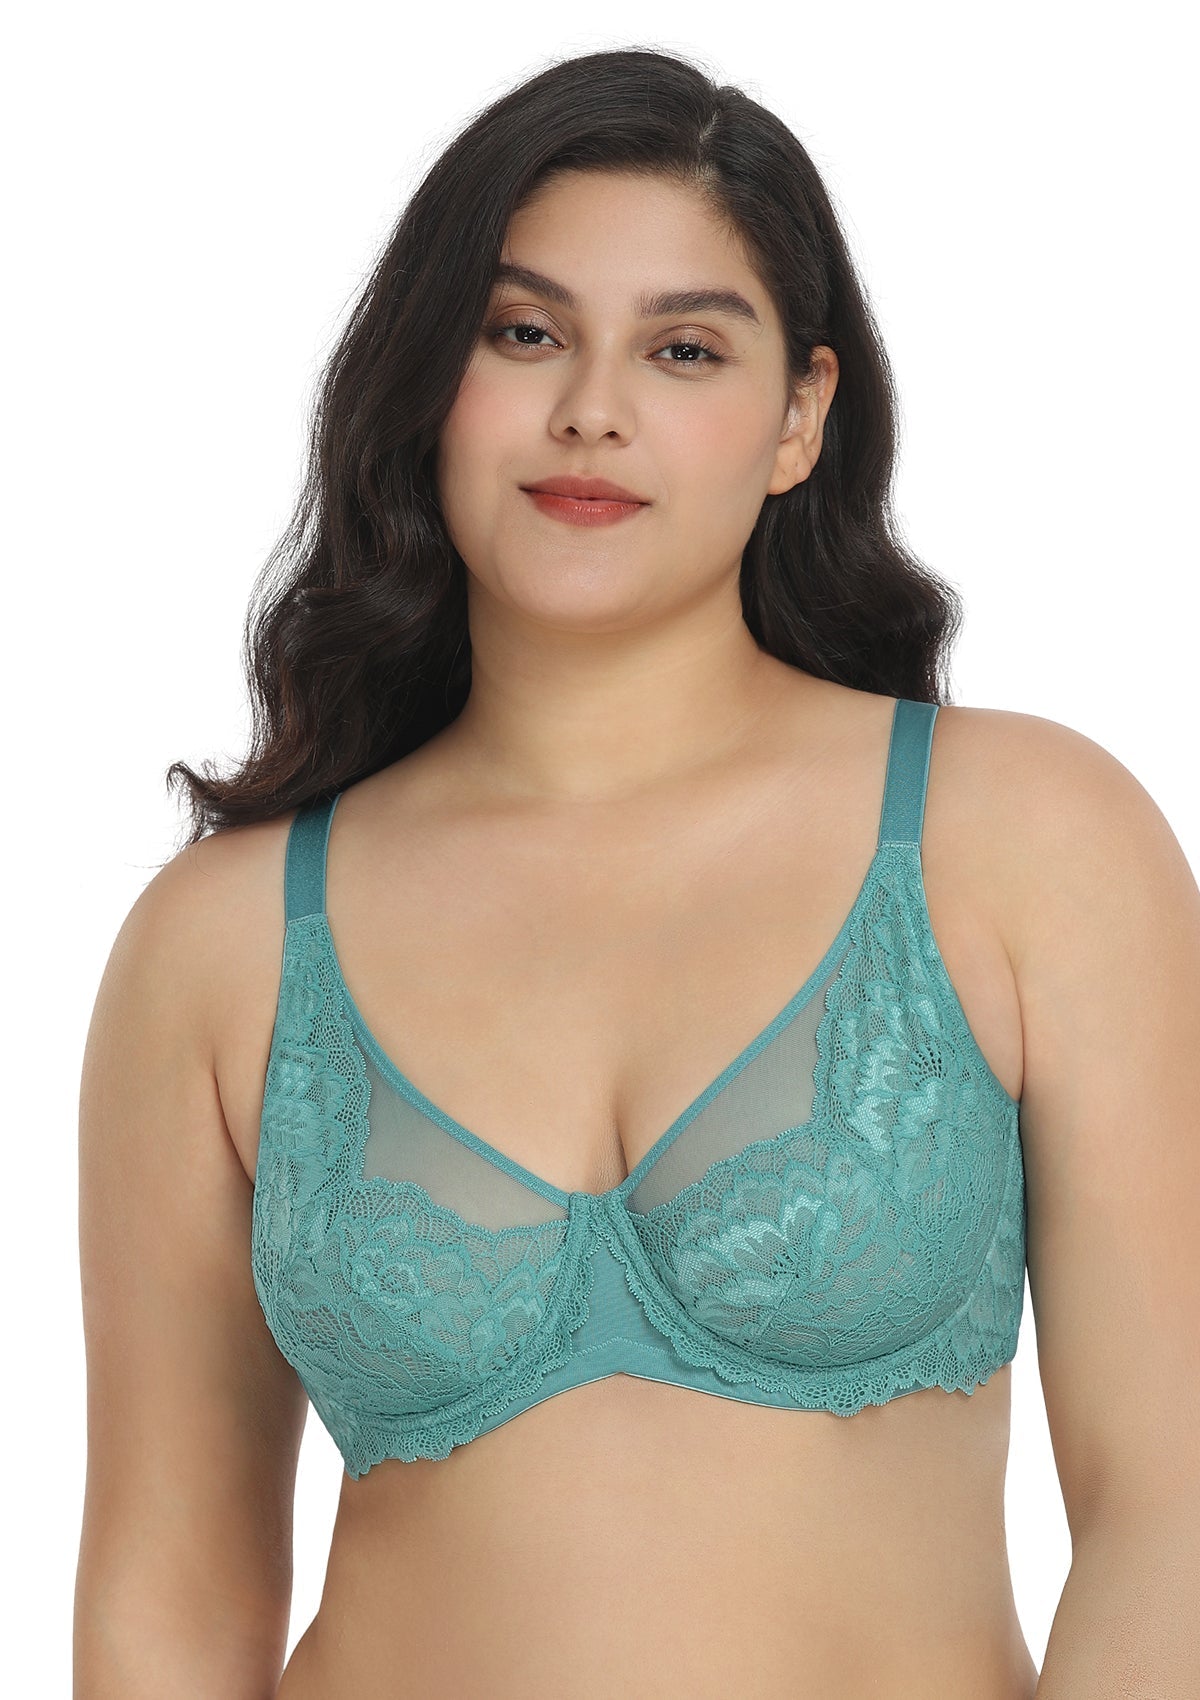 HSIA Paeonia Lace Full Coverage Underwire Non-Padded Uplifting Bra - Light Coral / 40 / D